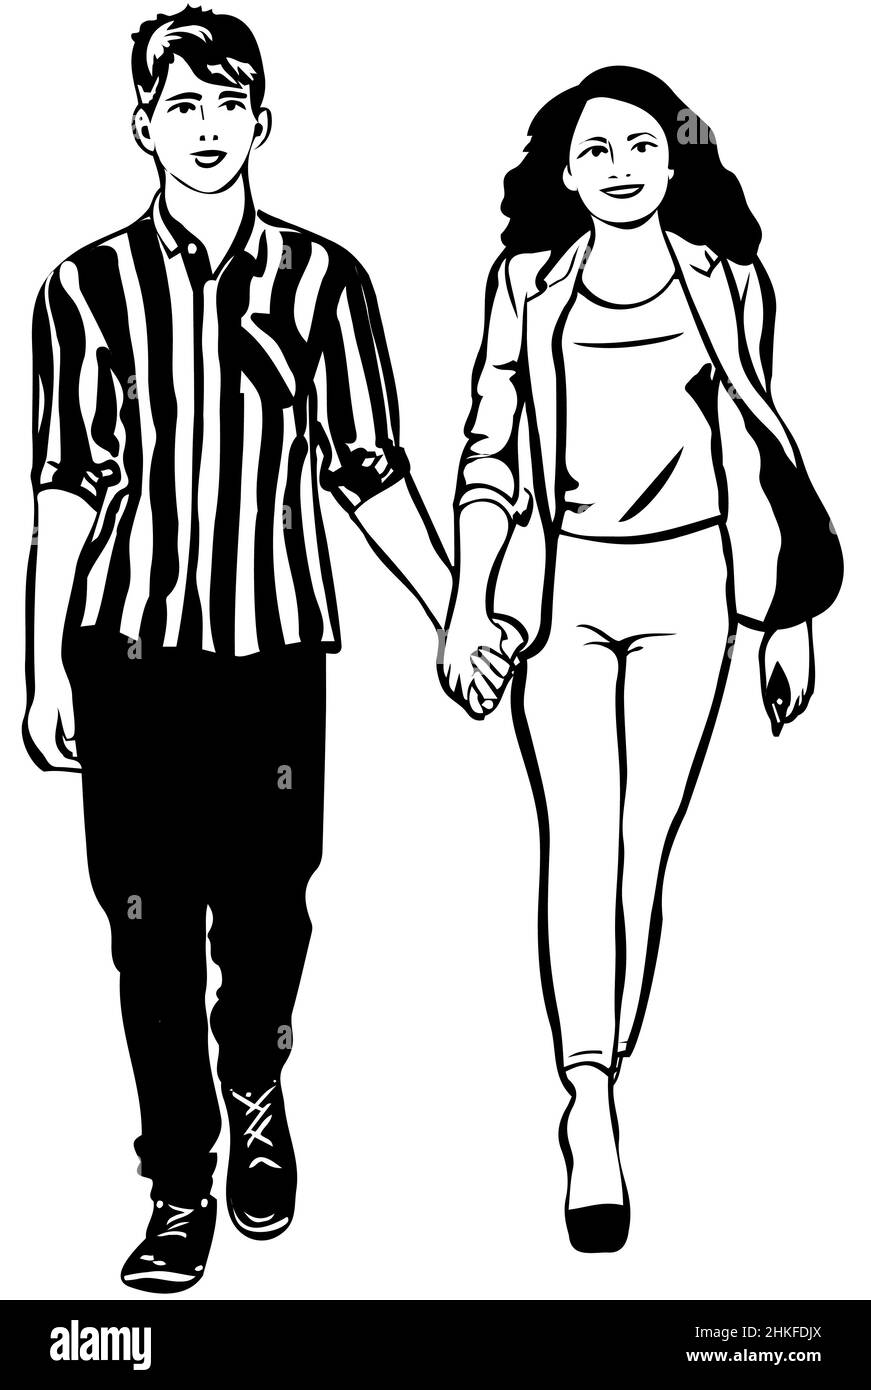 lack and white vector sketch of man and woman walking hand in handm Stock Photo